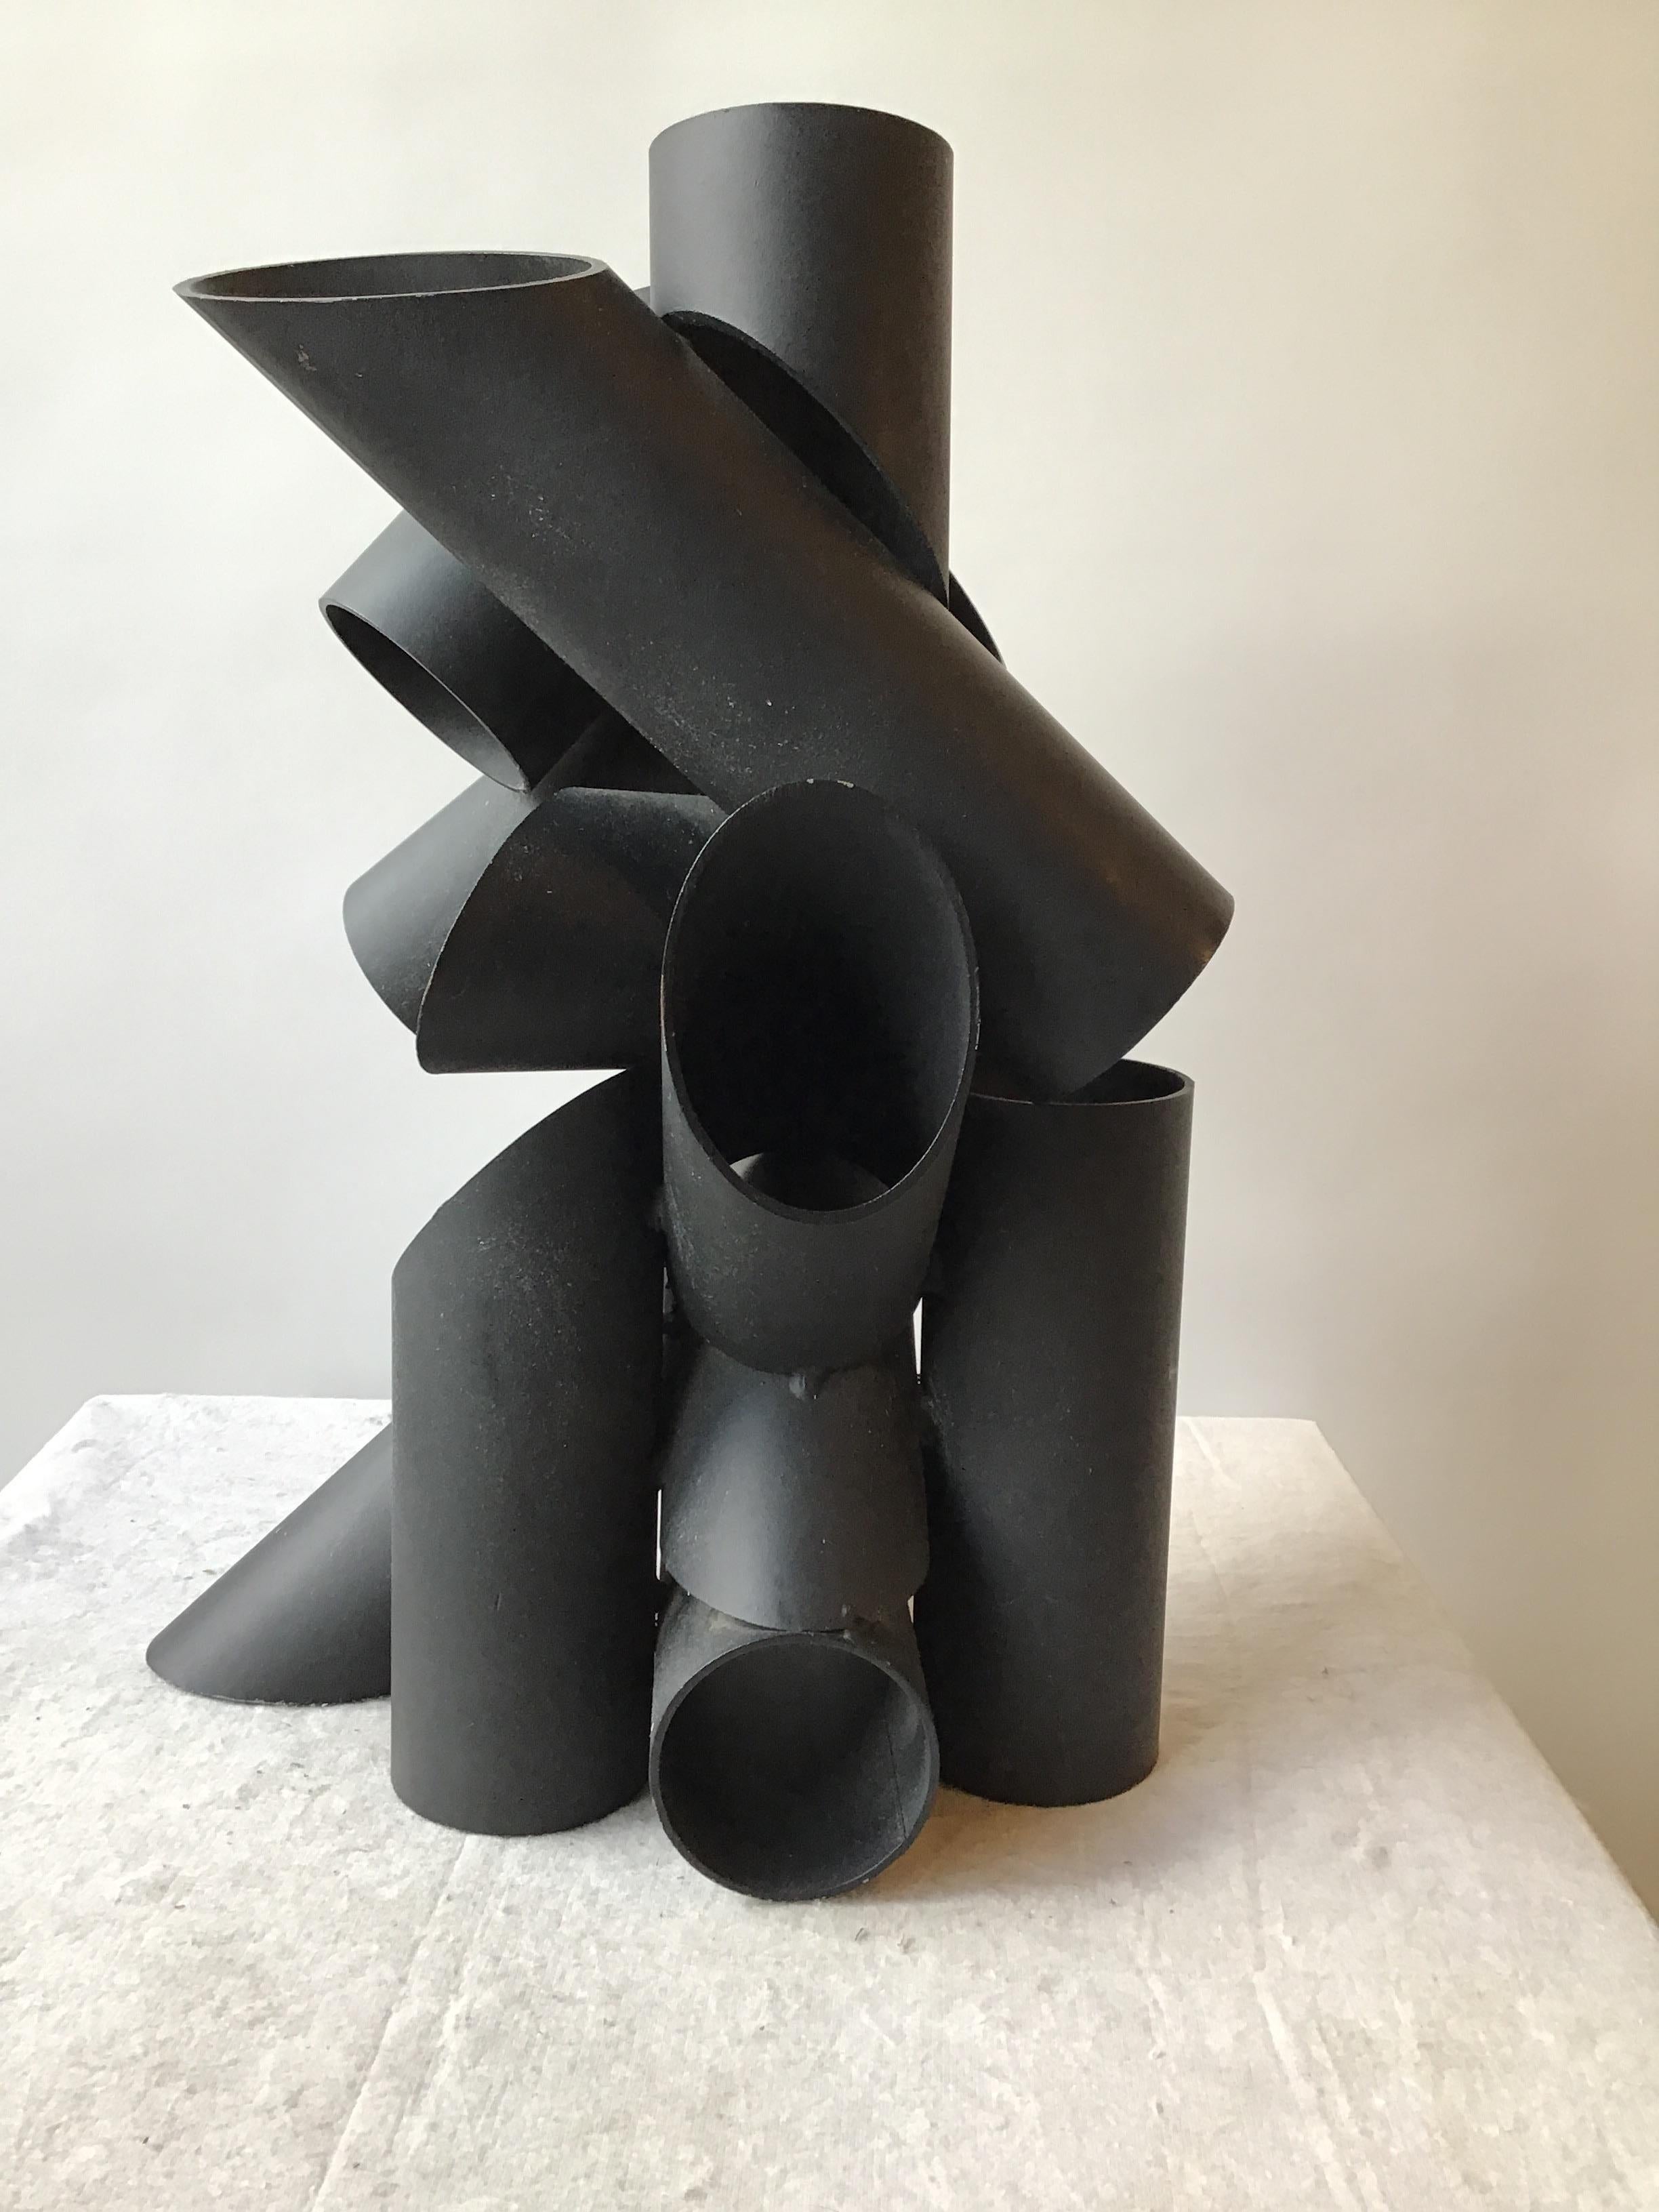 1970s Tubular Steel Sculpture In Good Condition For Sale In Tarrytown, NY